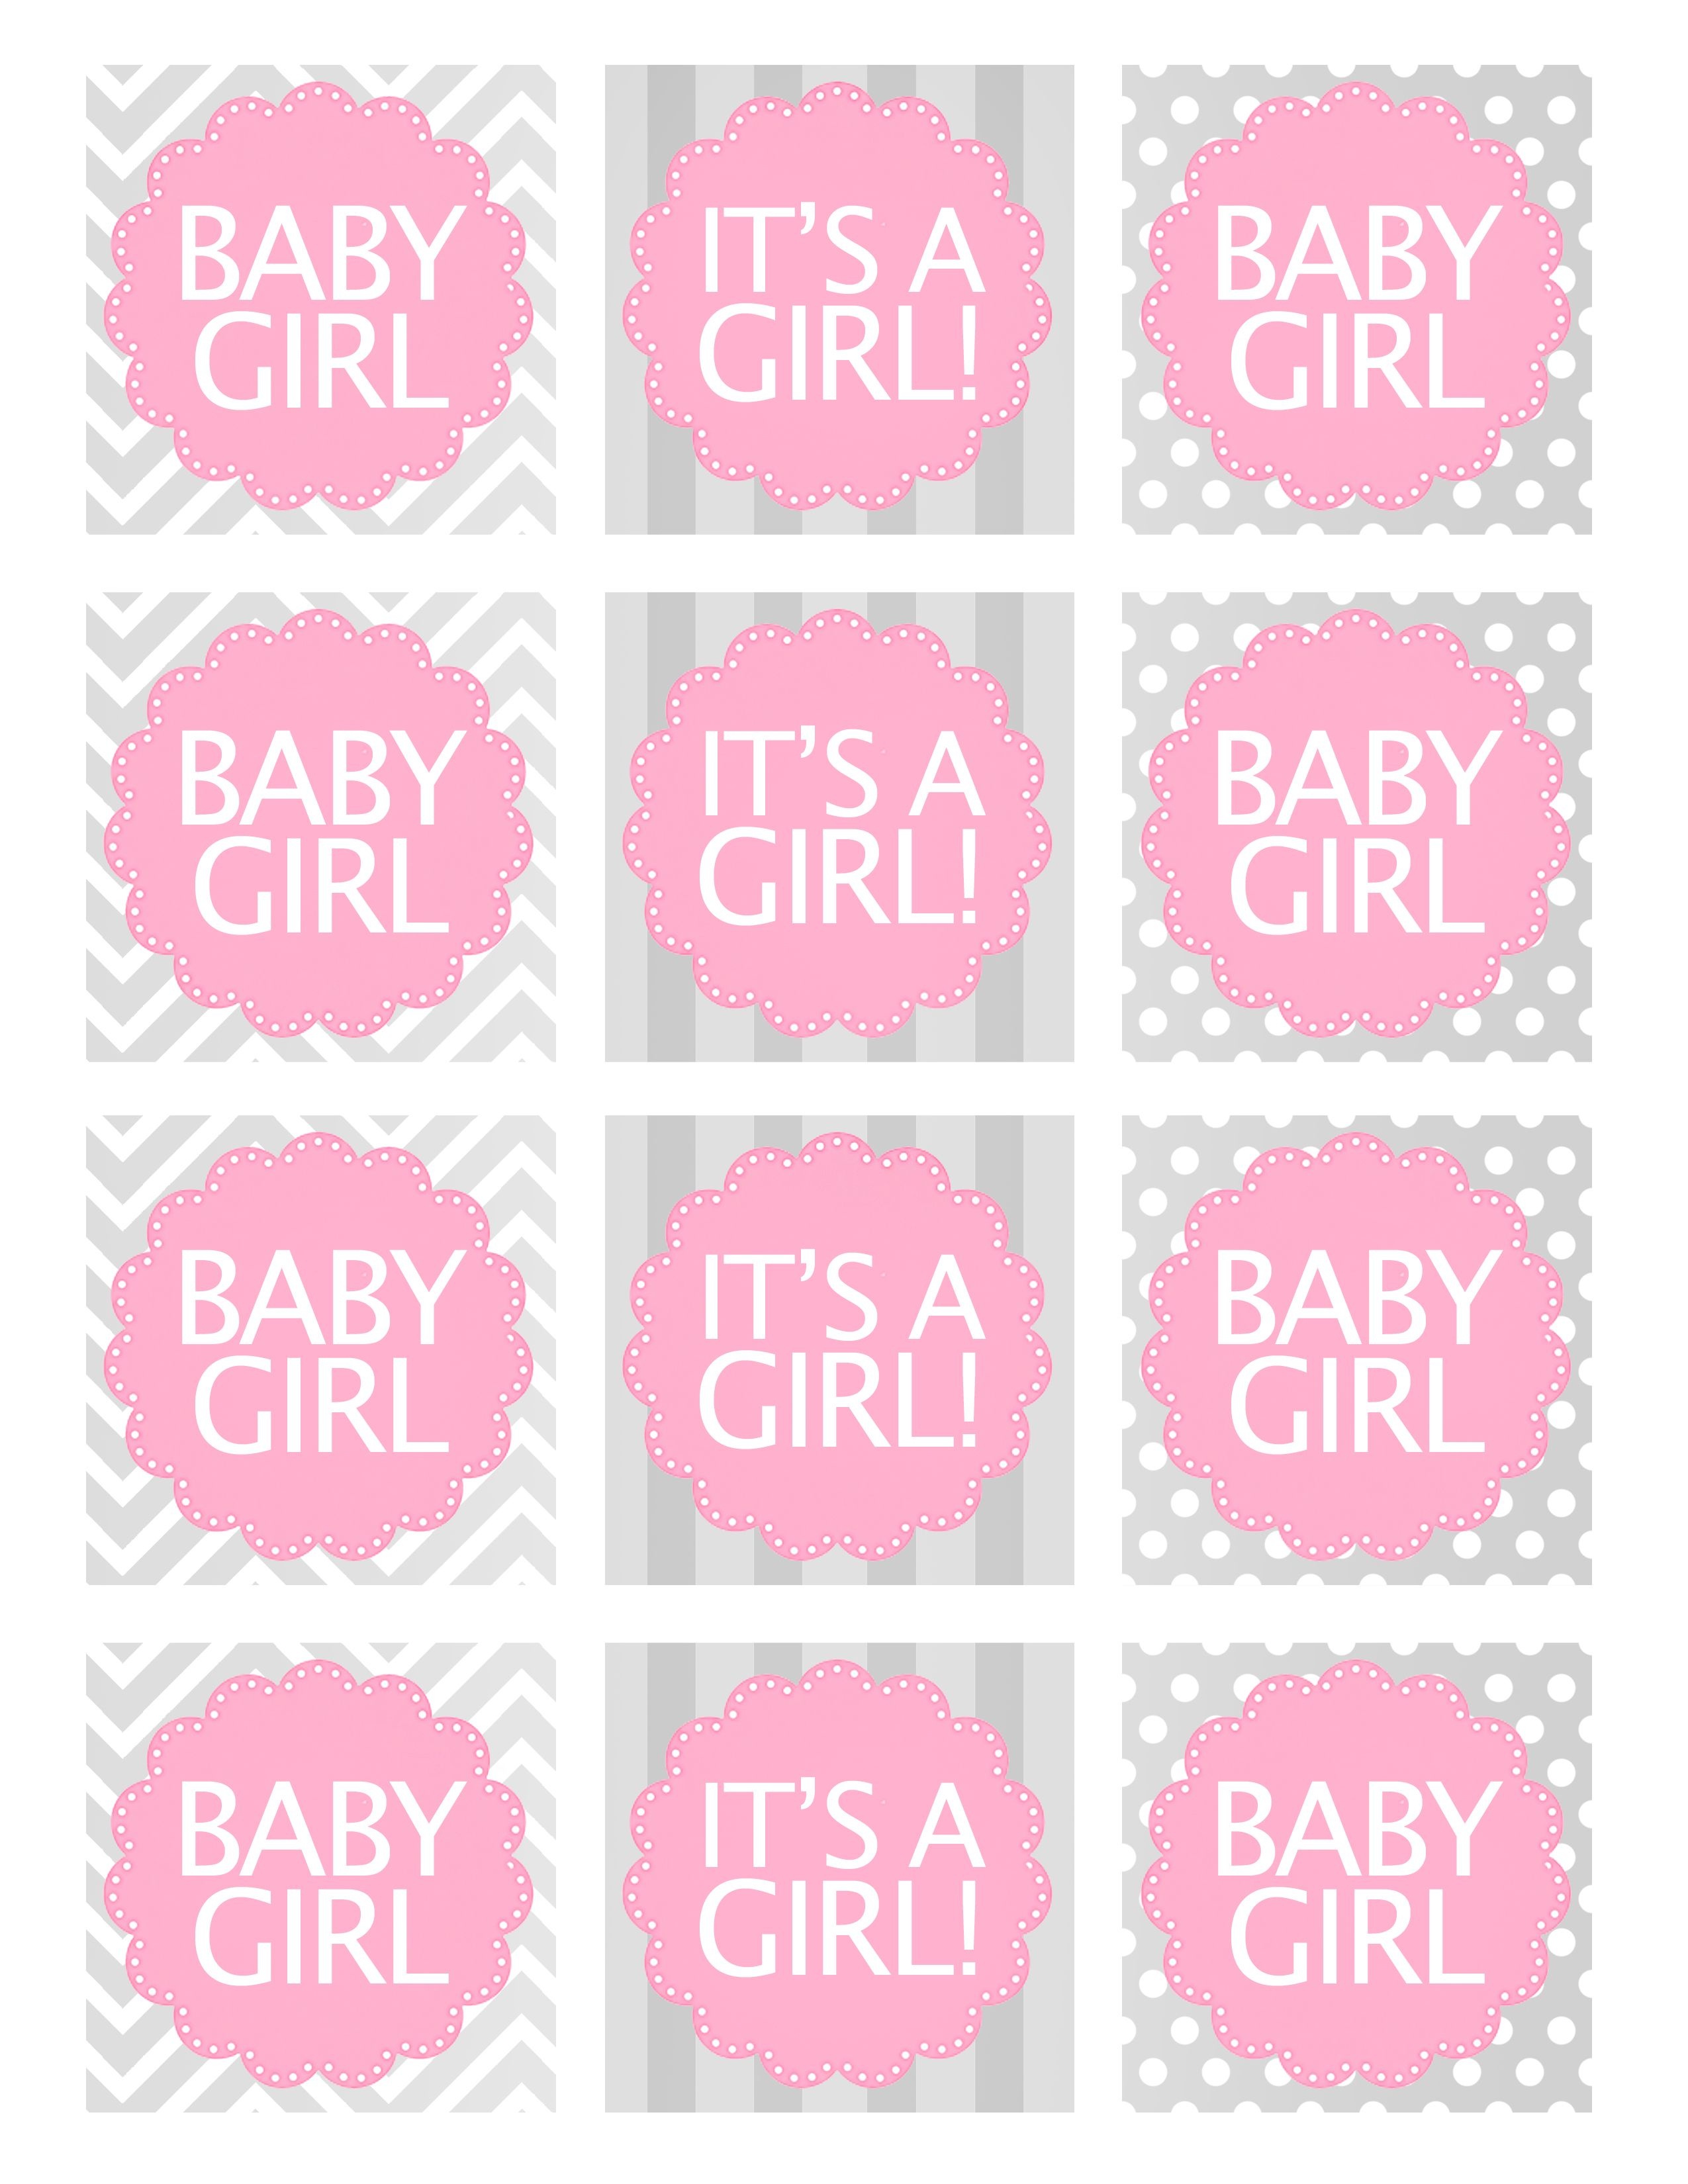 Baby Girl Shower Free Printables | Baby Shower Ideas | Baby Shower - Free Printable Baby Shower Favor Tags Template